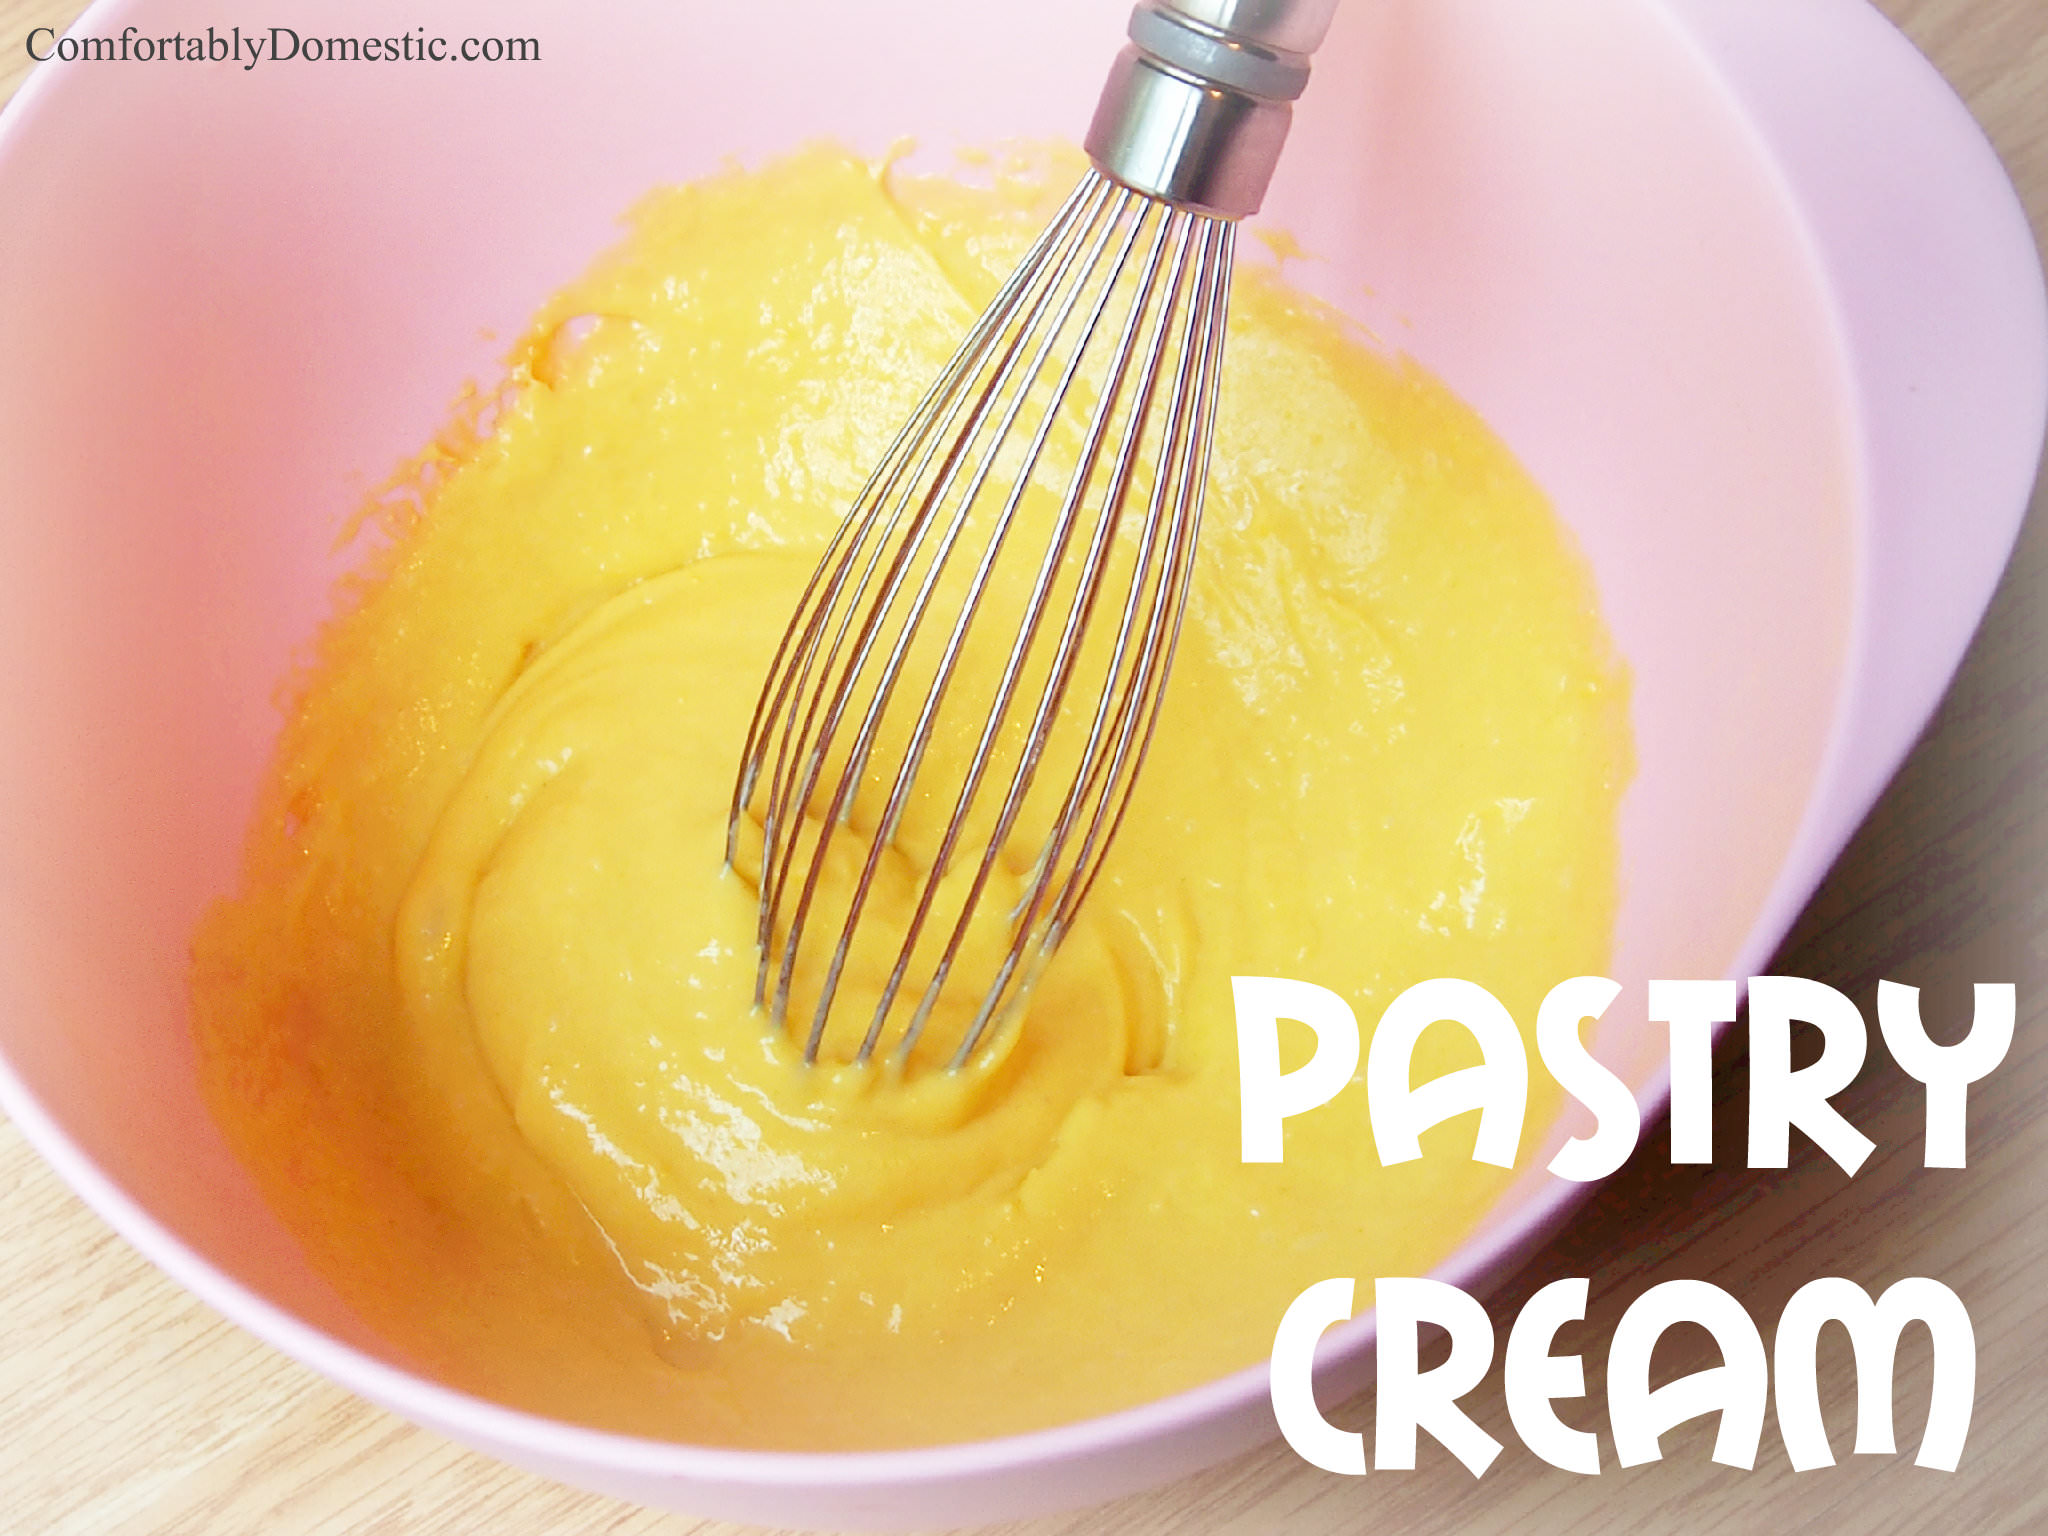 Pastry cream is a delicious, sweet, egg-based custard, primarily used as filling for desserts. Uses for pastry cream range from donuts to cakes and pies to pudding. | ComfortablyDomestic.com